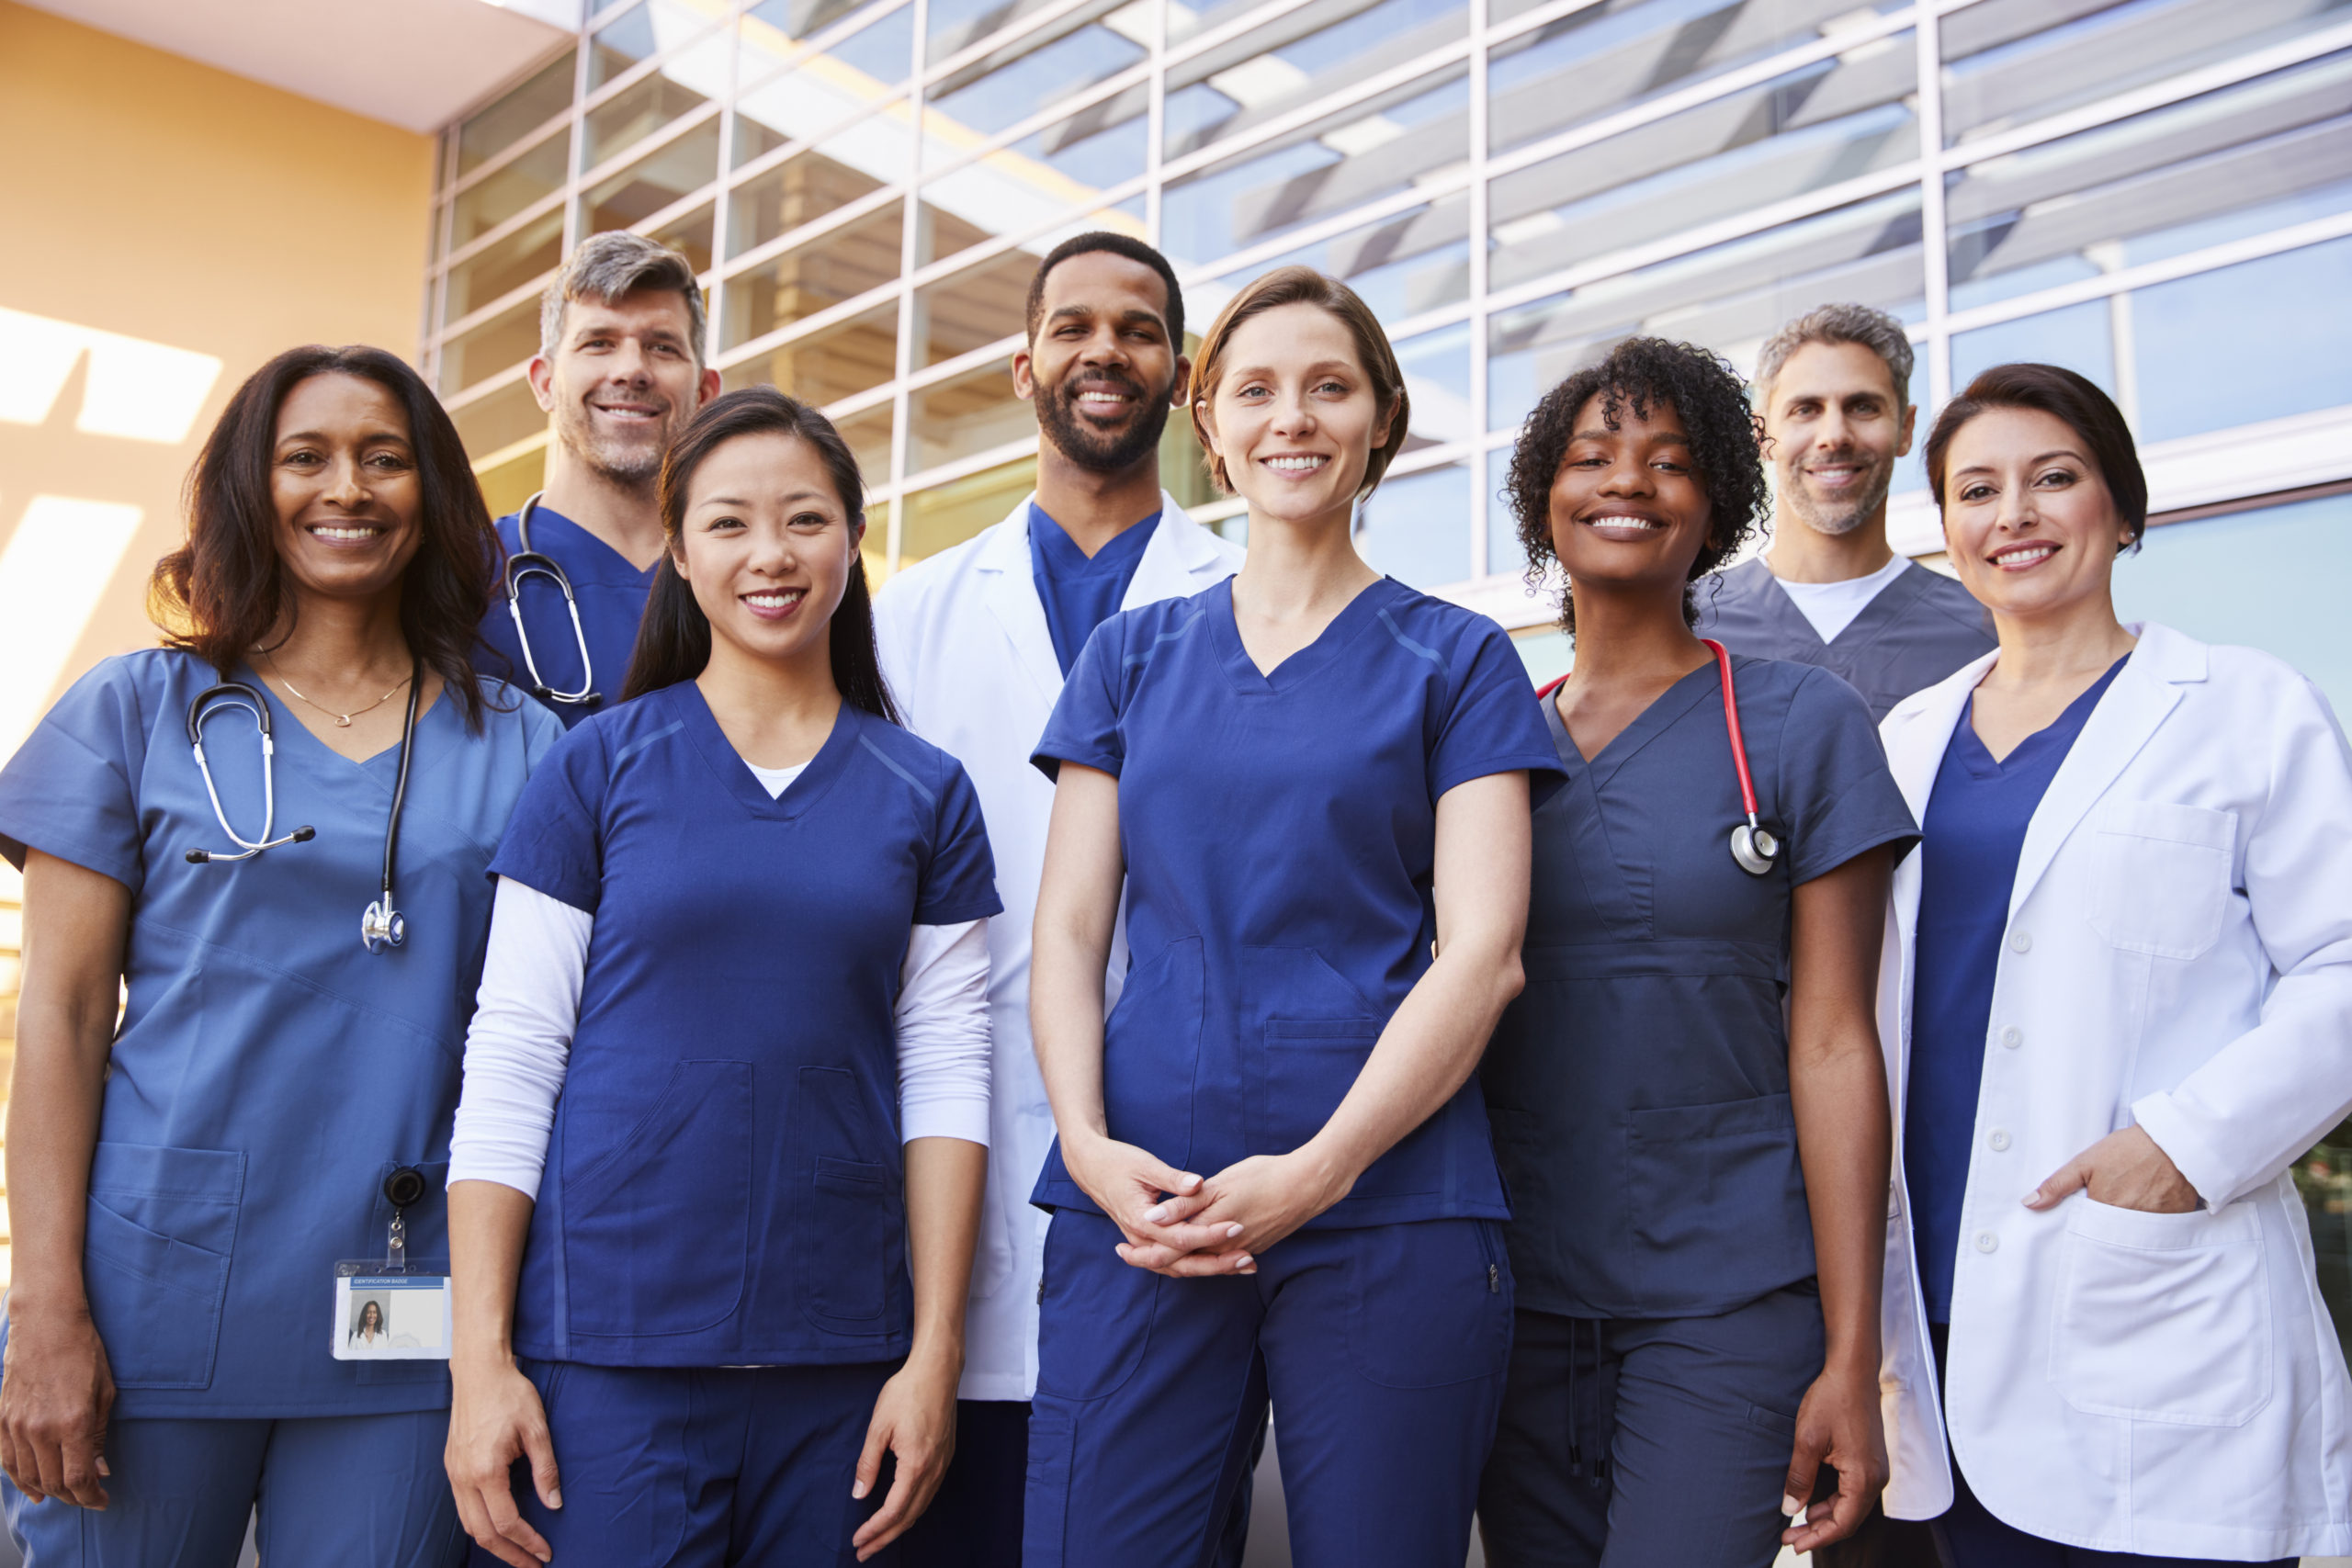 Our permanent placements and locum tenens divisions are ready to help!